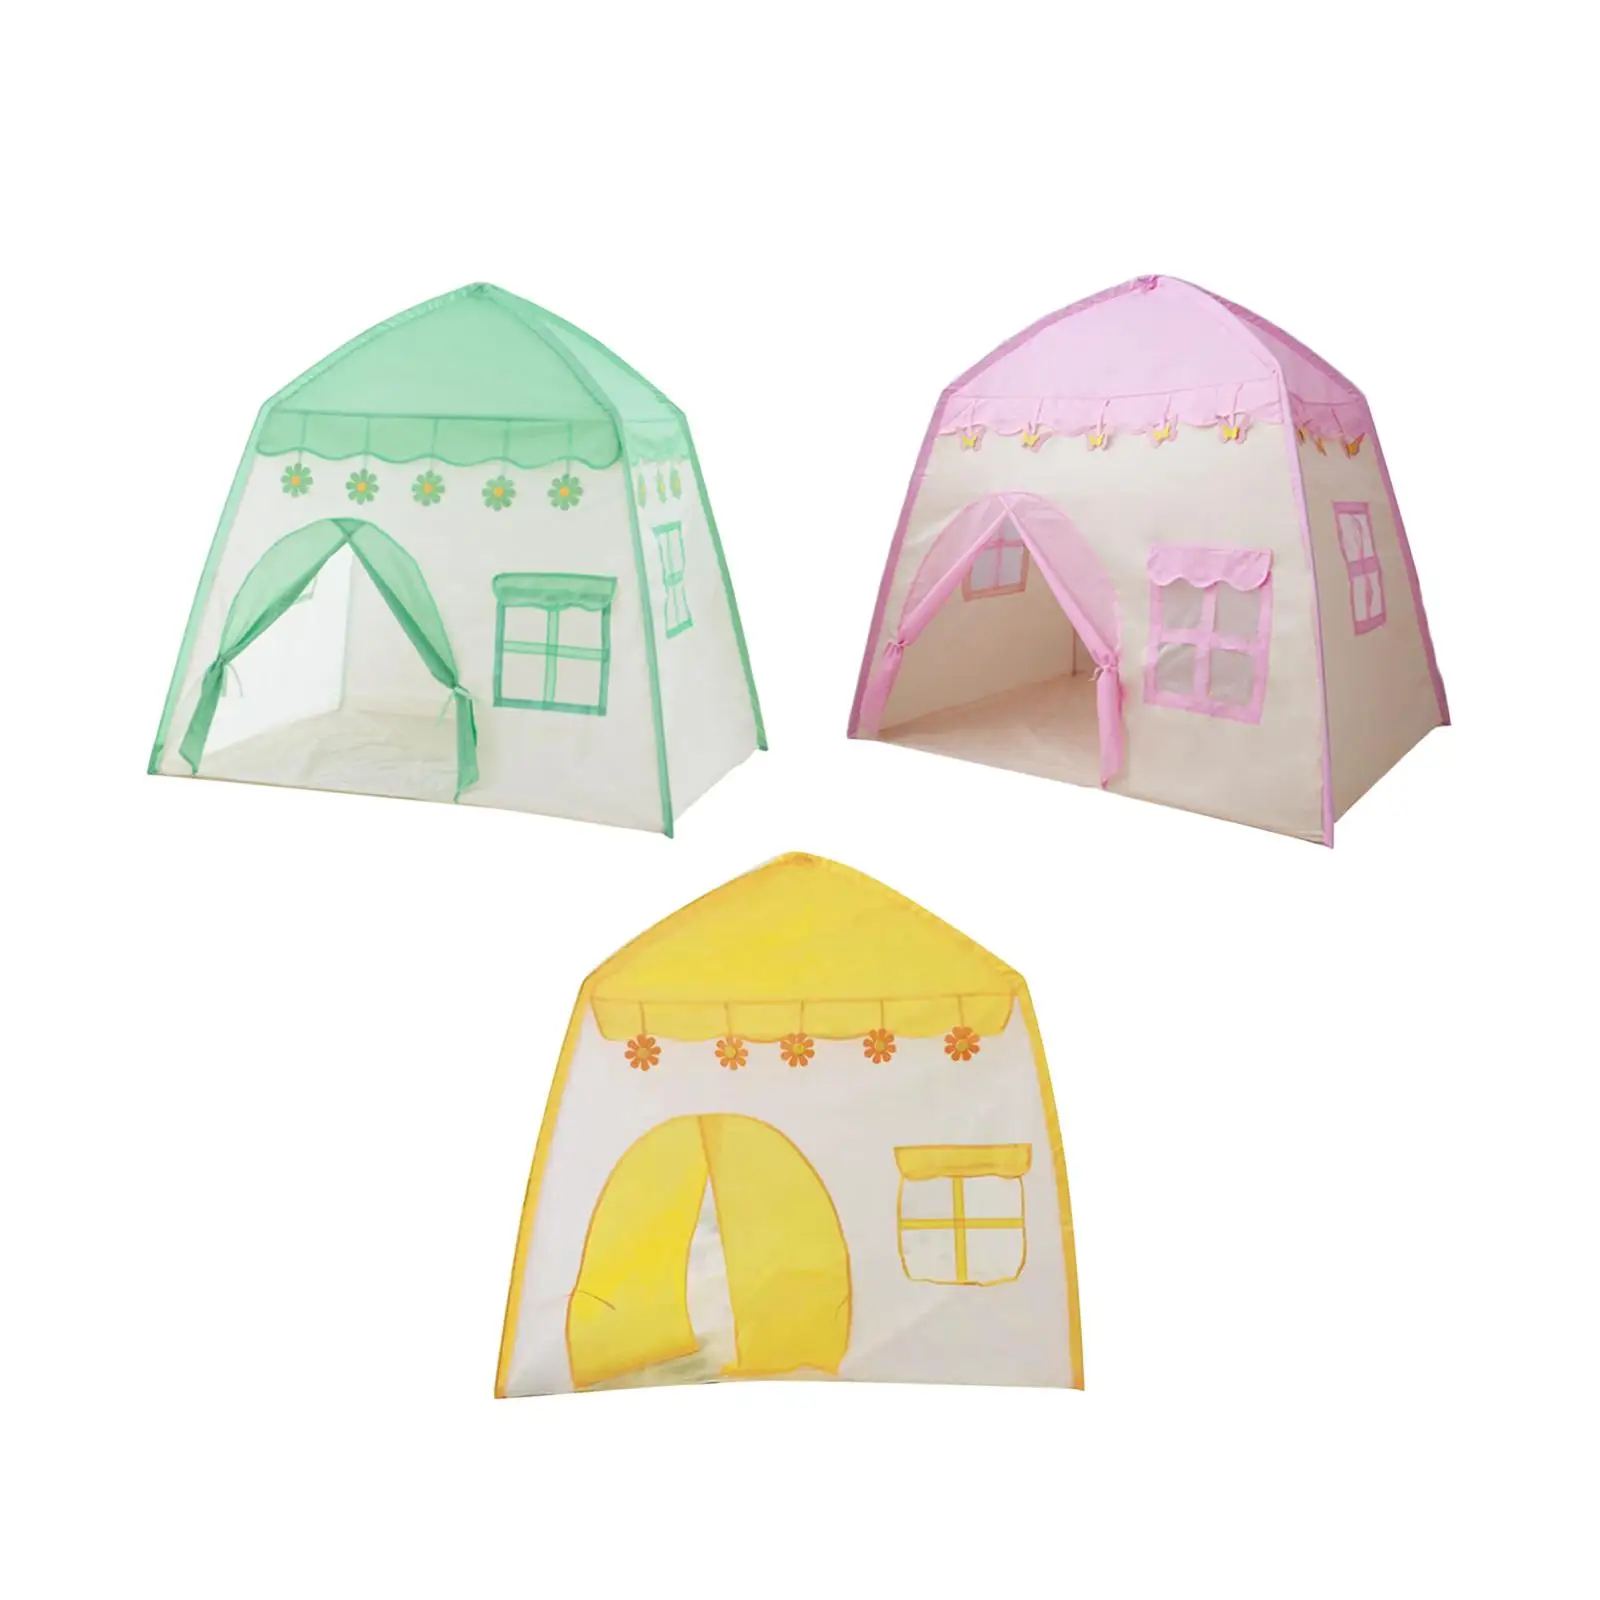 Kids Play Tent Outdoor Indoor Game Fun Game Tent Easy Installation Portable for Park Outdoor Indoor Camping Home